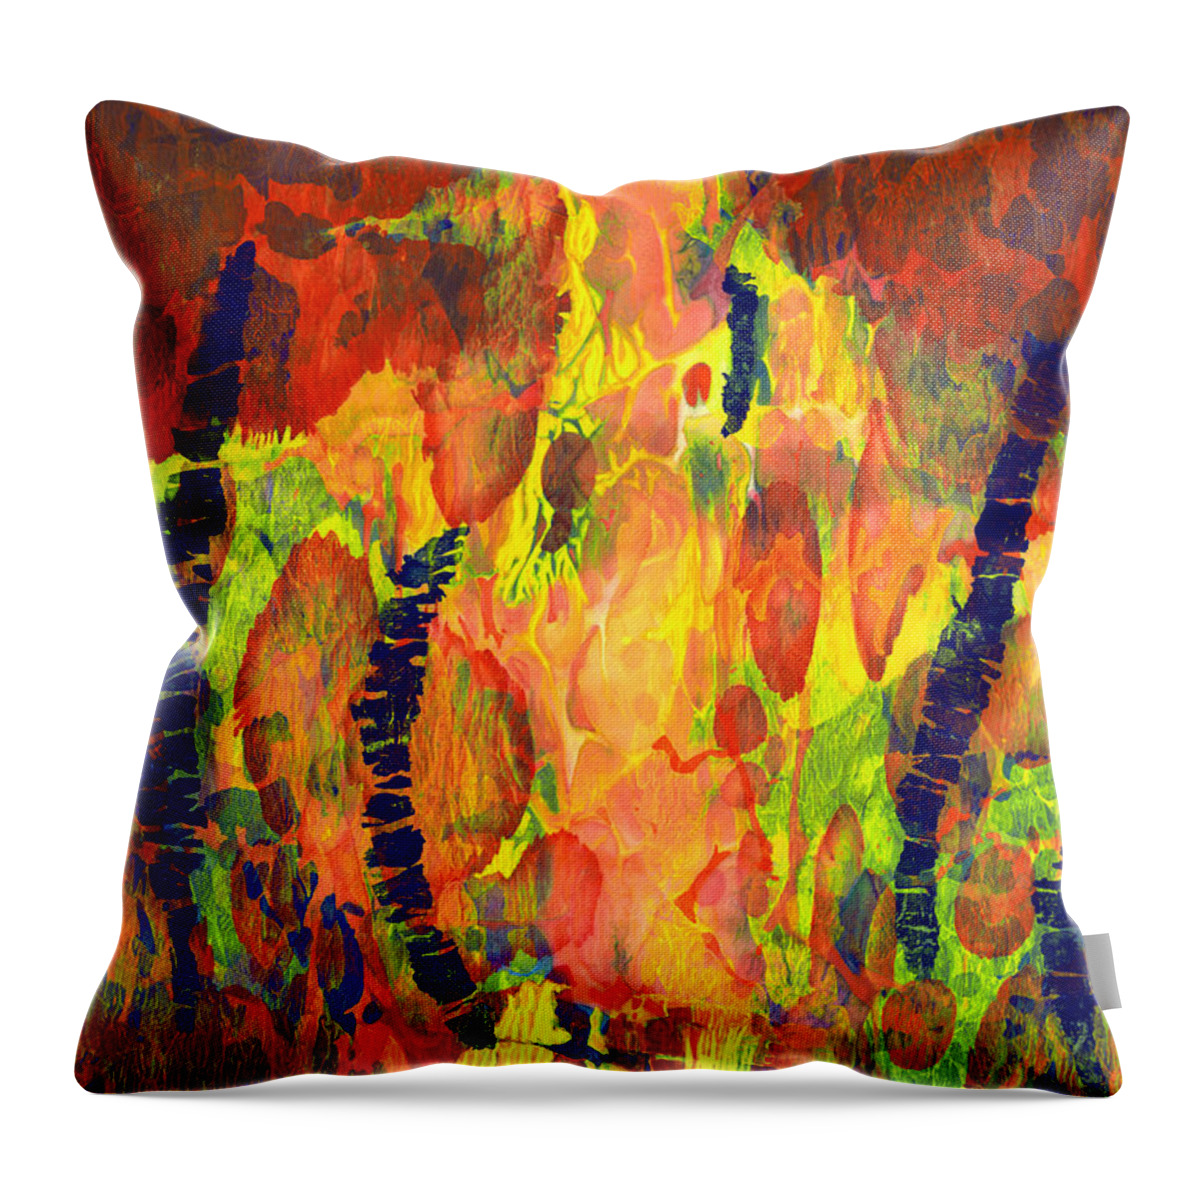 Abstract Throw Pillow featuring the painting Tribal Essence by Lynda Hoffman-Snodgrass